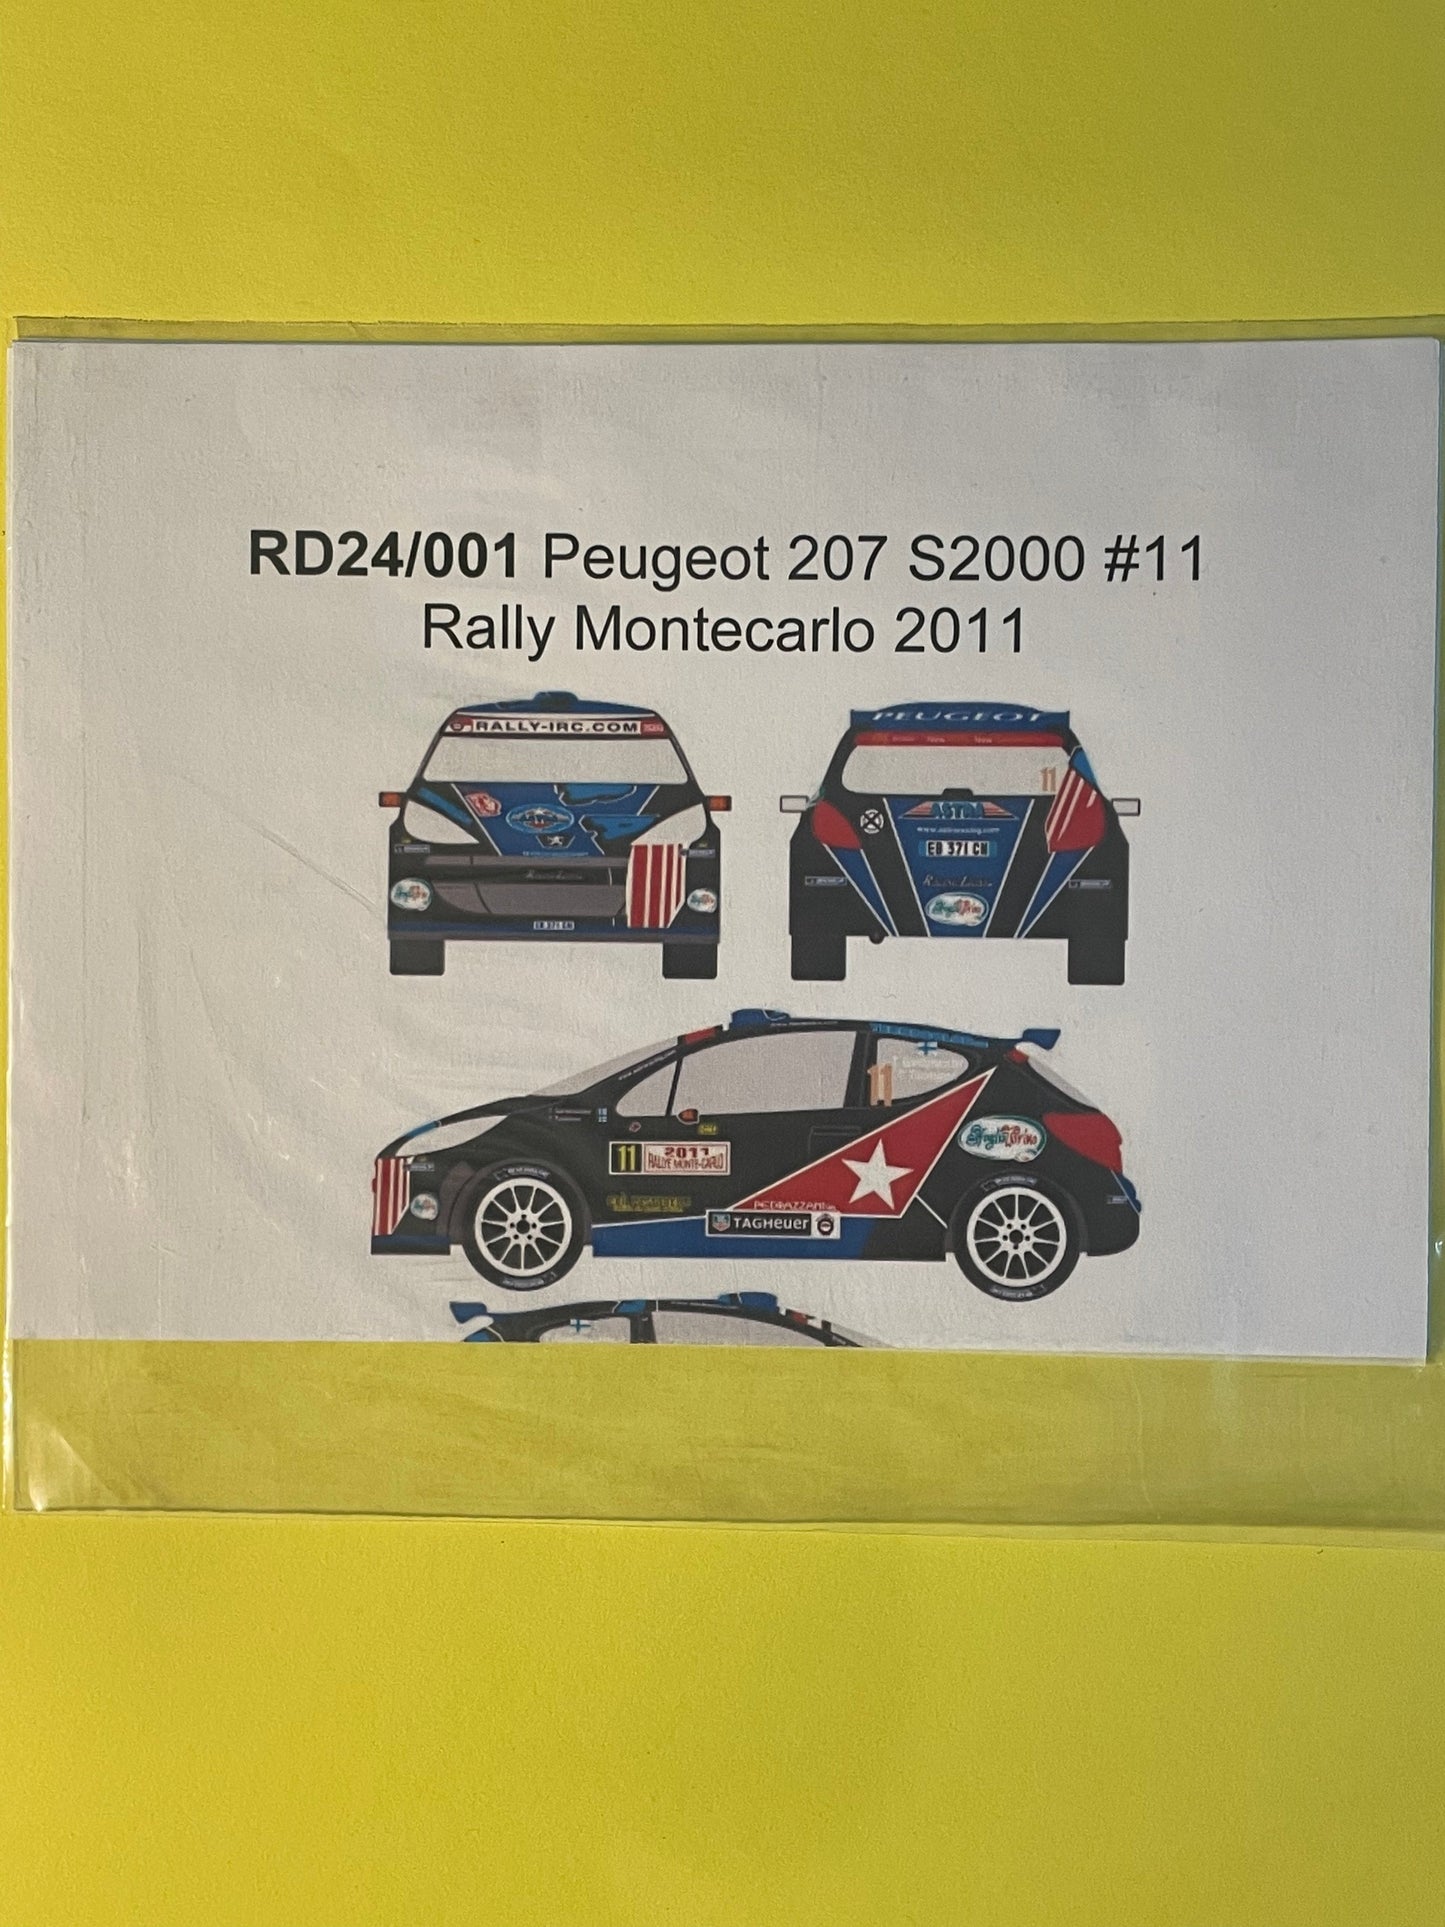 DECALS PEUGEOT 207 S2000 - ASTRA - RALLY MONTE CARLO 2011